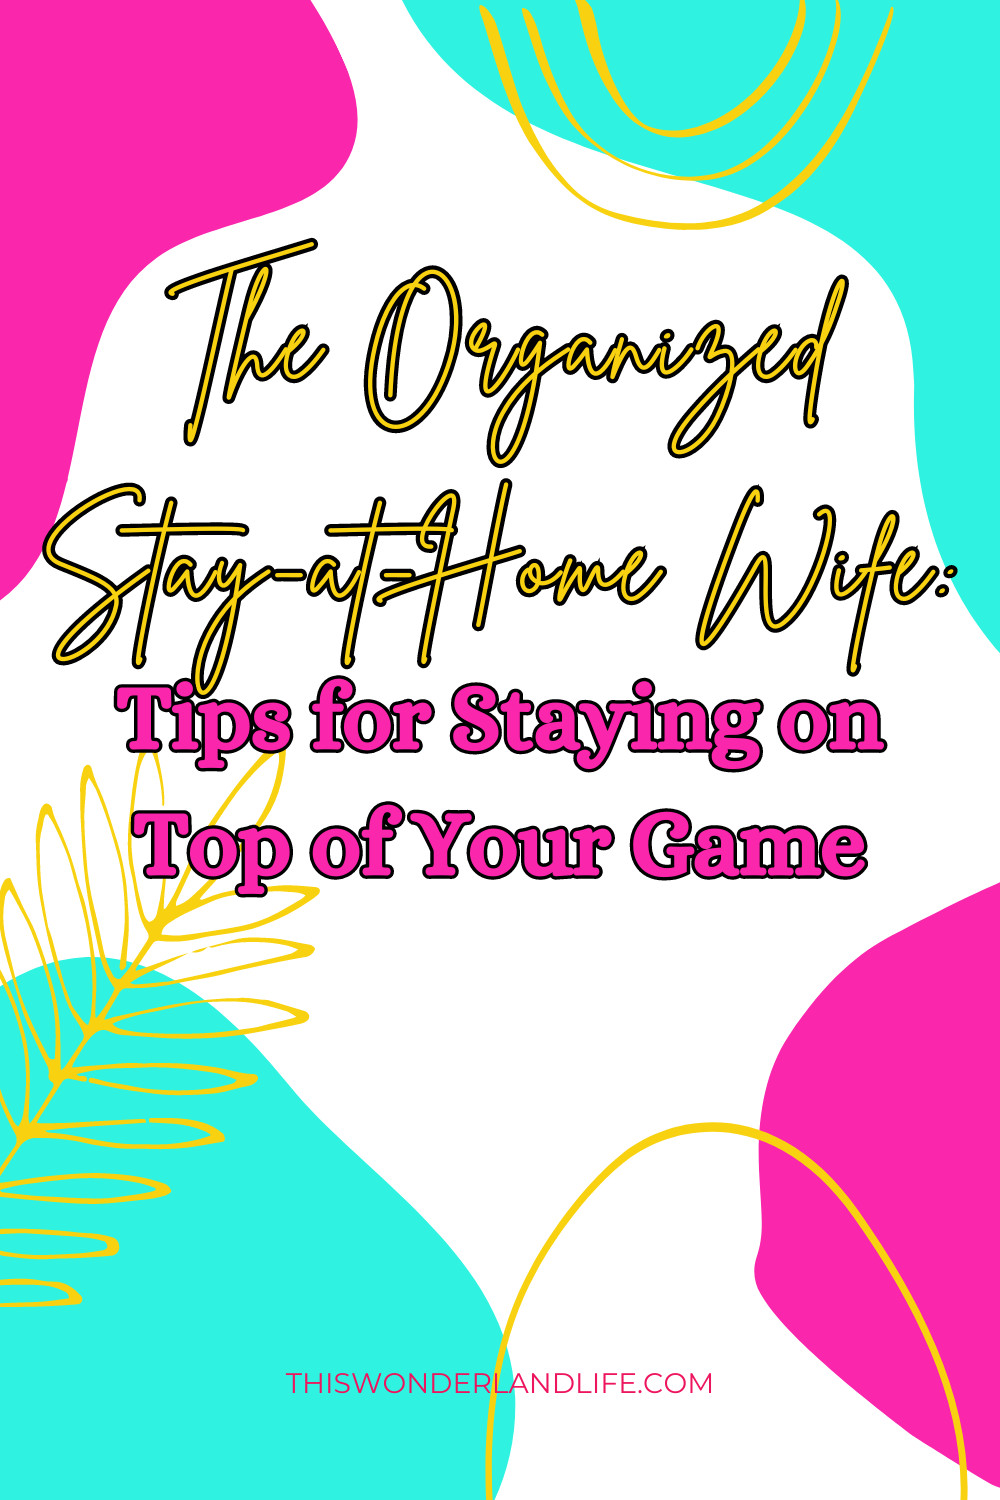 The Organized Stay-at-Home Wife: Tips for Staying on Top of Your Game